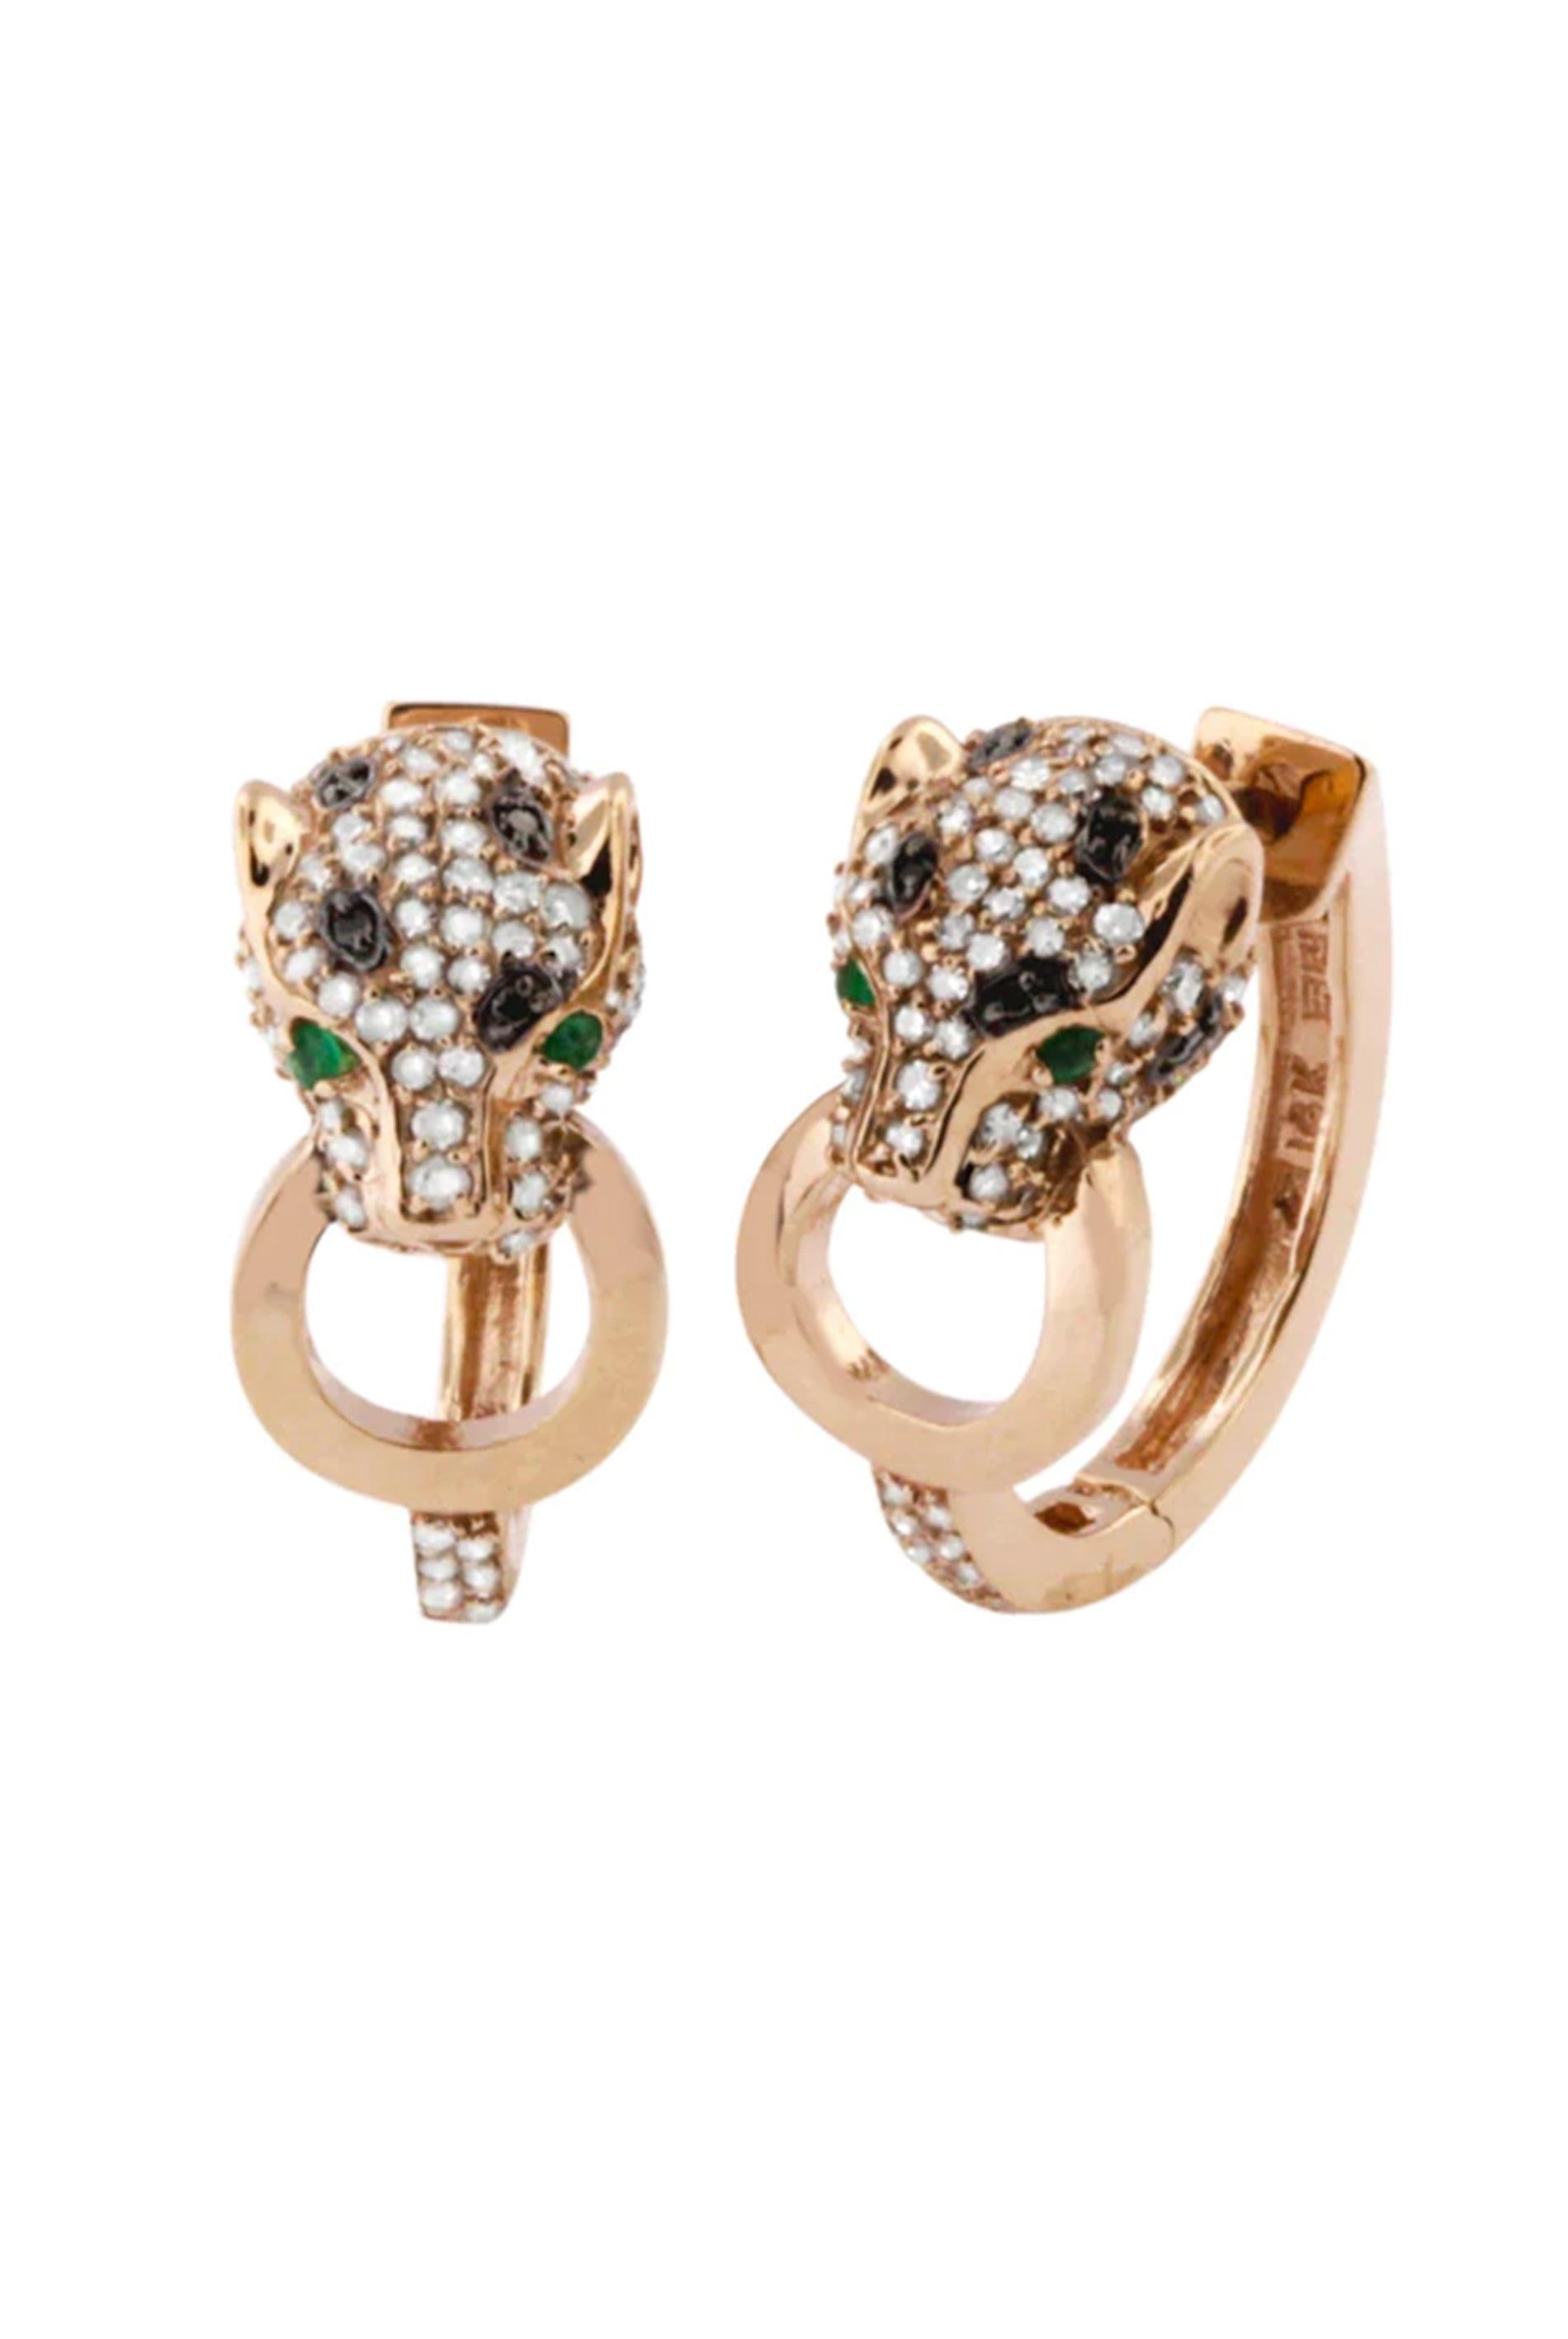 Asscher Cut EFFY's distinctive Panther Hoops Earrings crafted in 14k Rose Gold For Sale